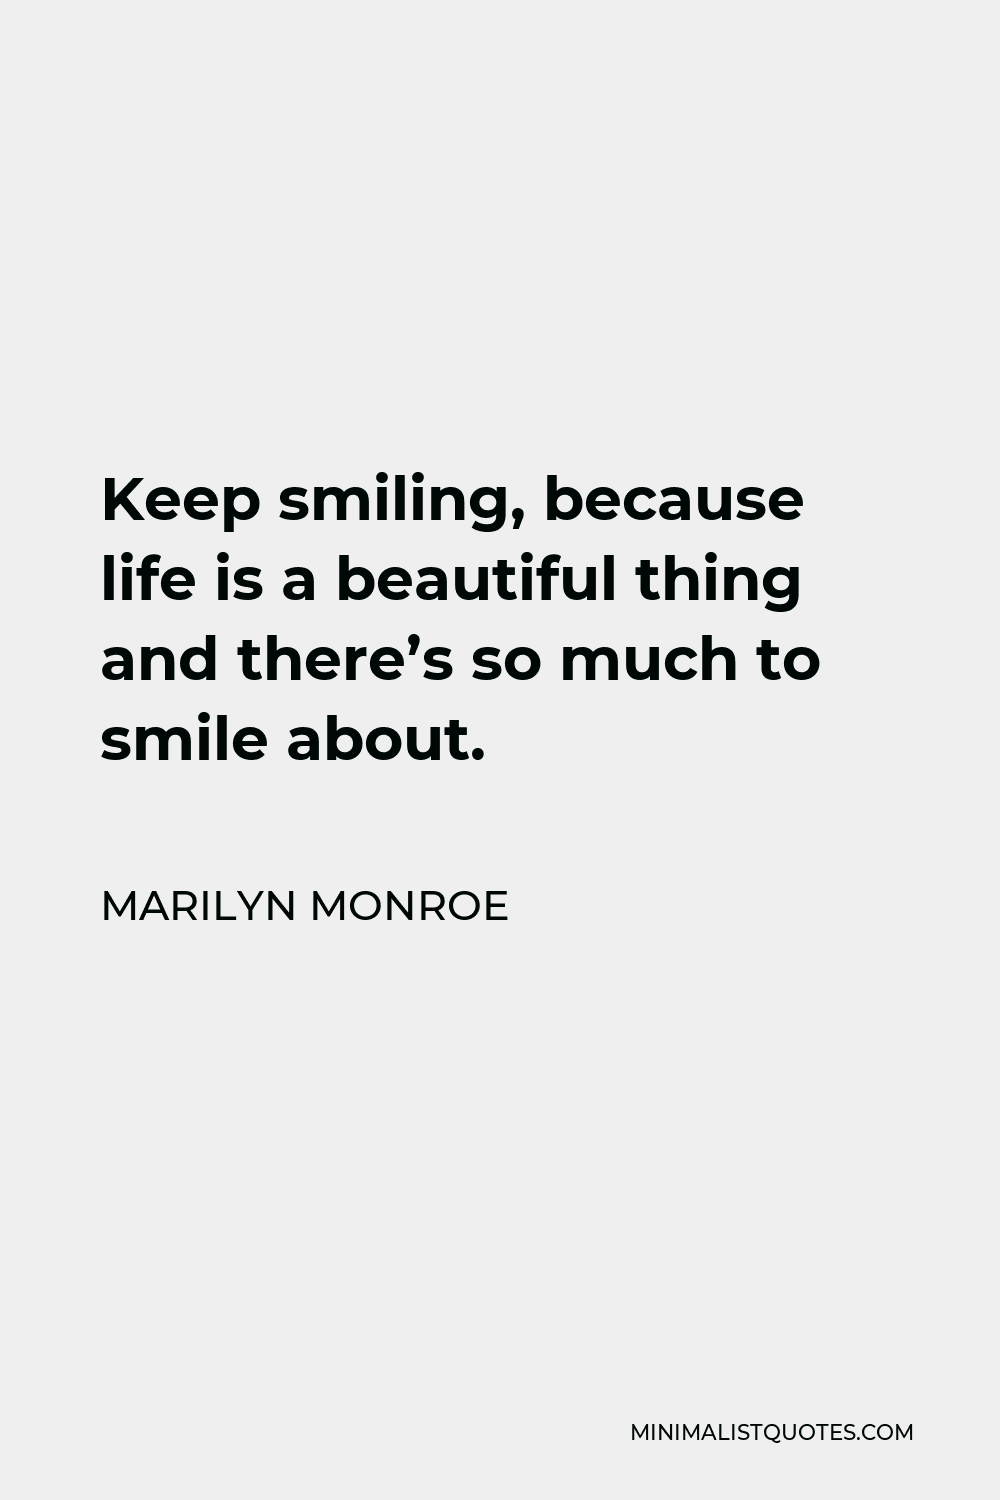 Marilyn Monroe Quote - Keep smiling, because life is a beautiful thing and there’s so much to smile about.